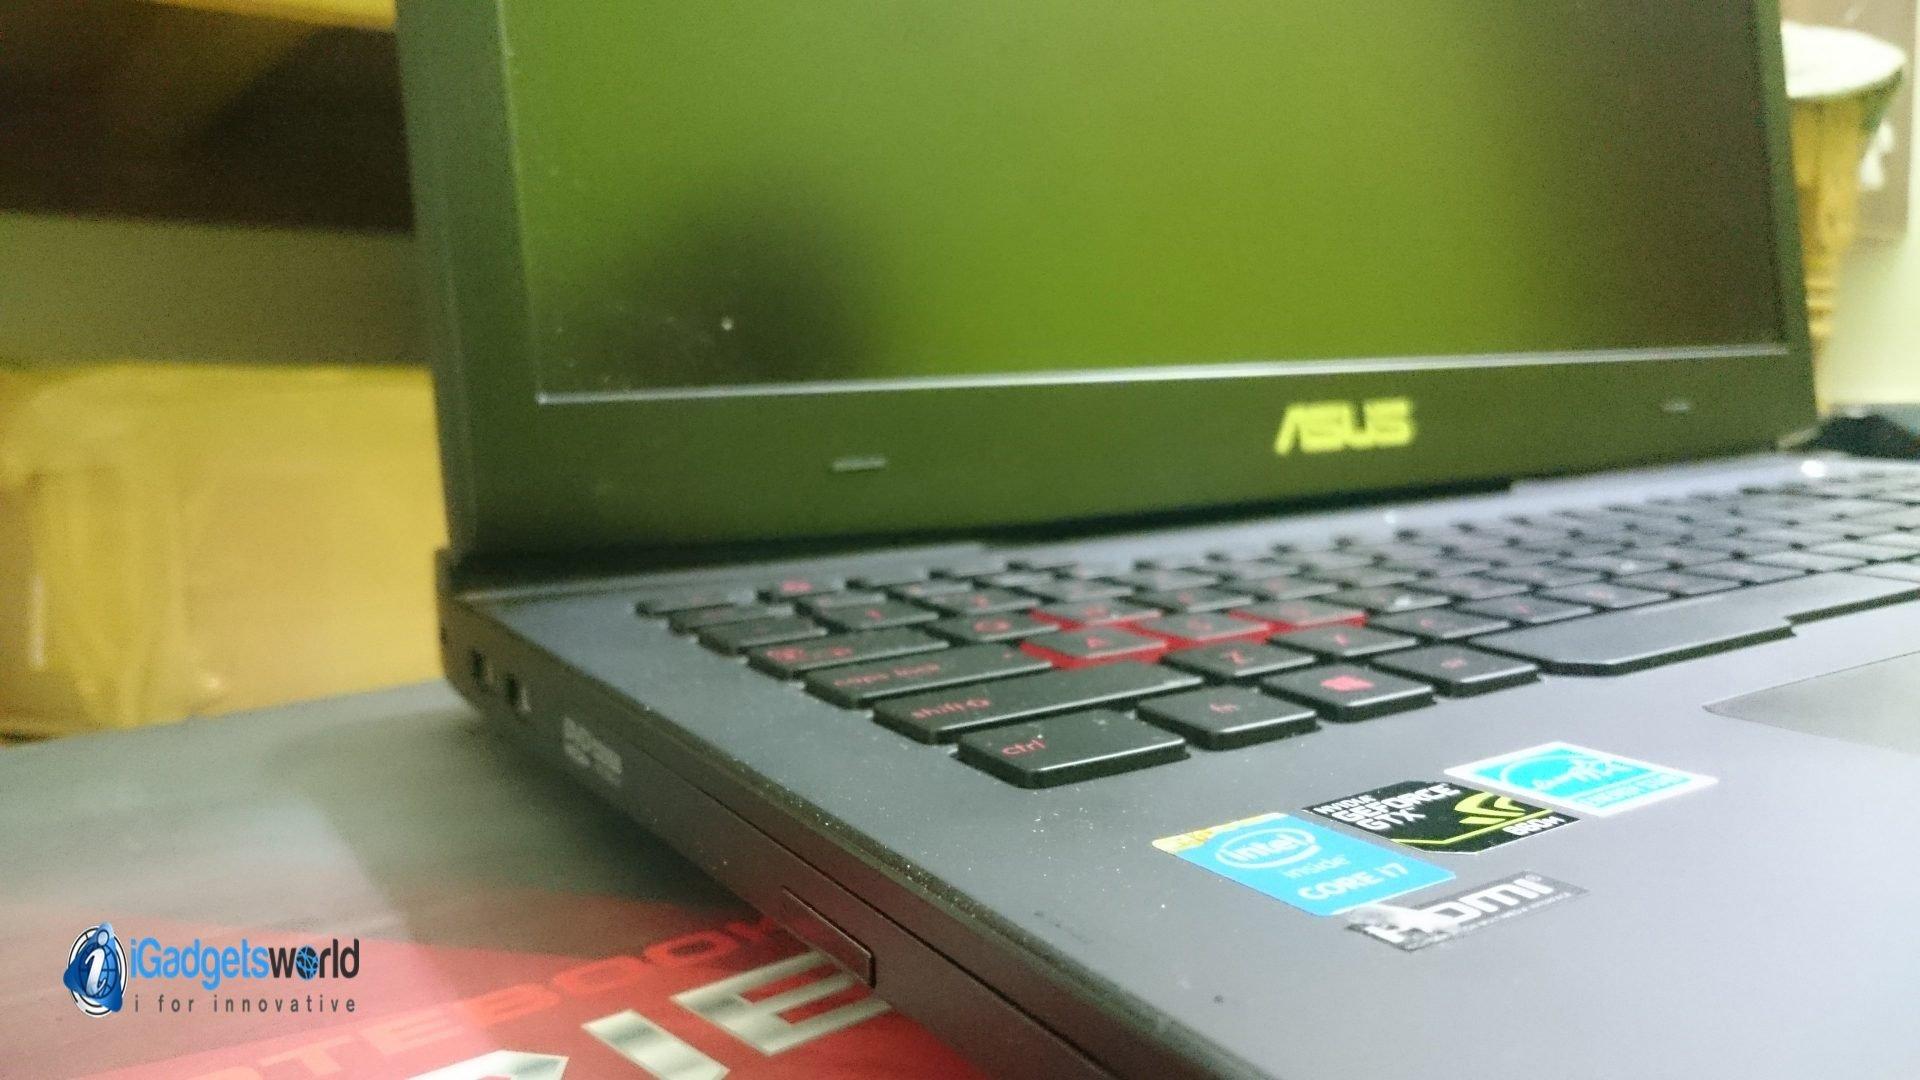 Asus ROG G751J Review: A Slightly Overpriced Ultra High-End Gaming Laptop - 22